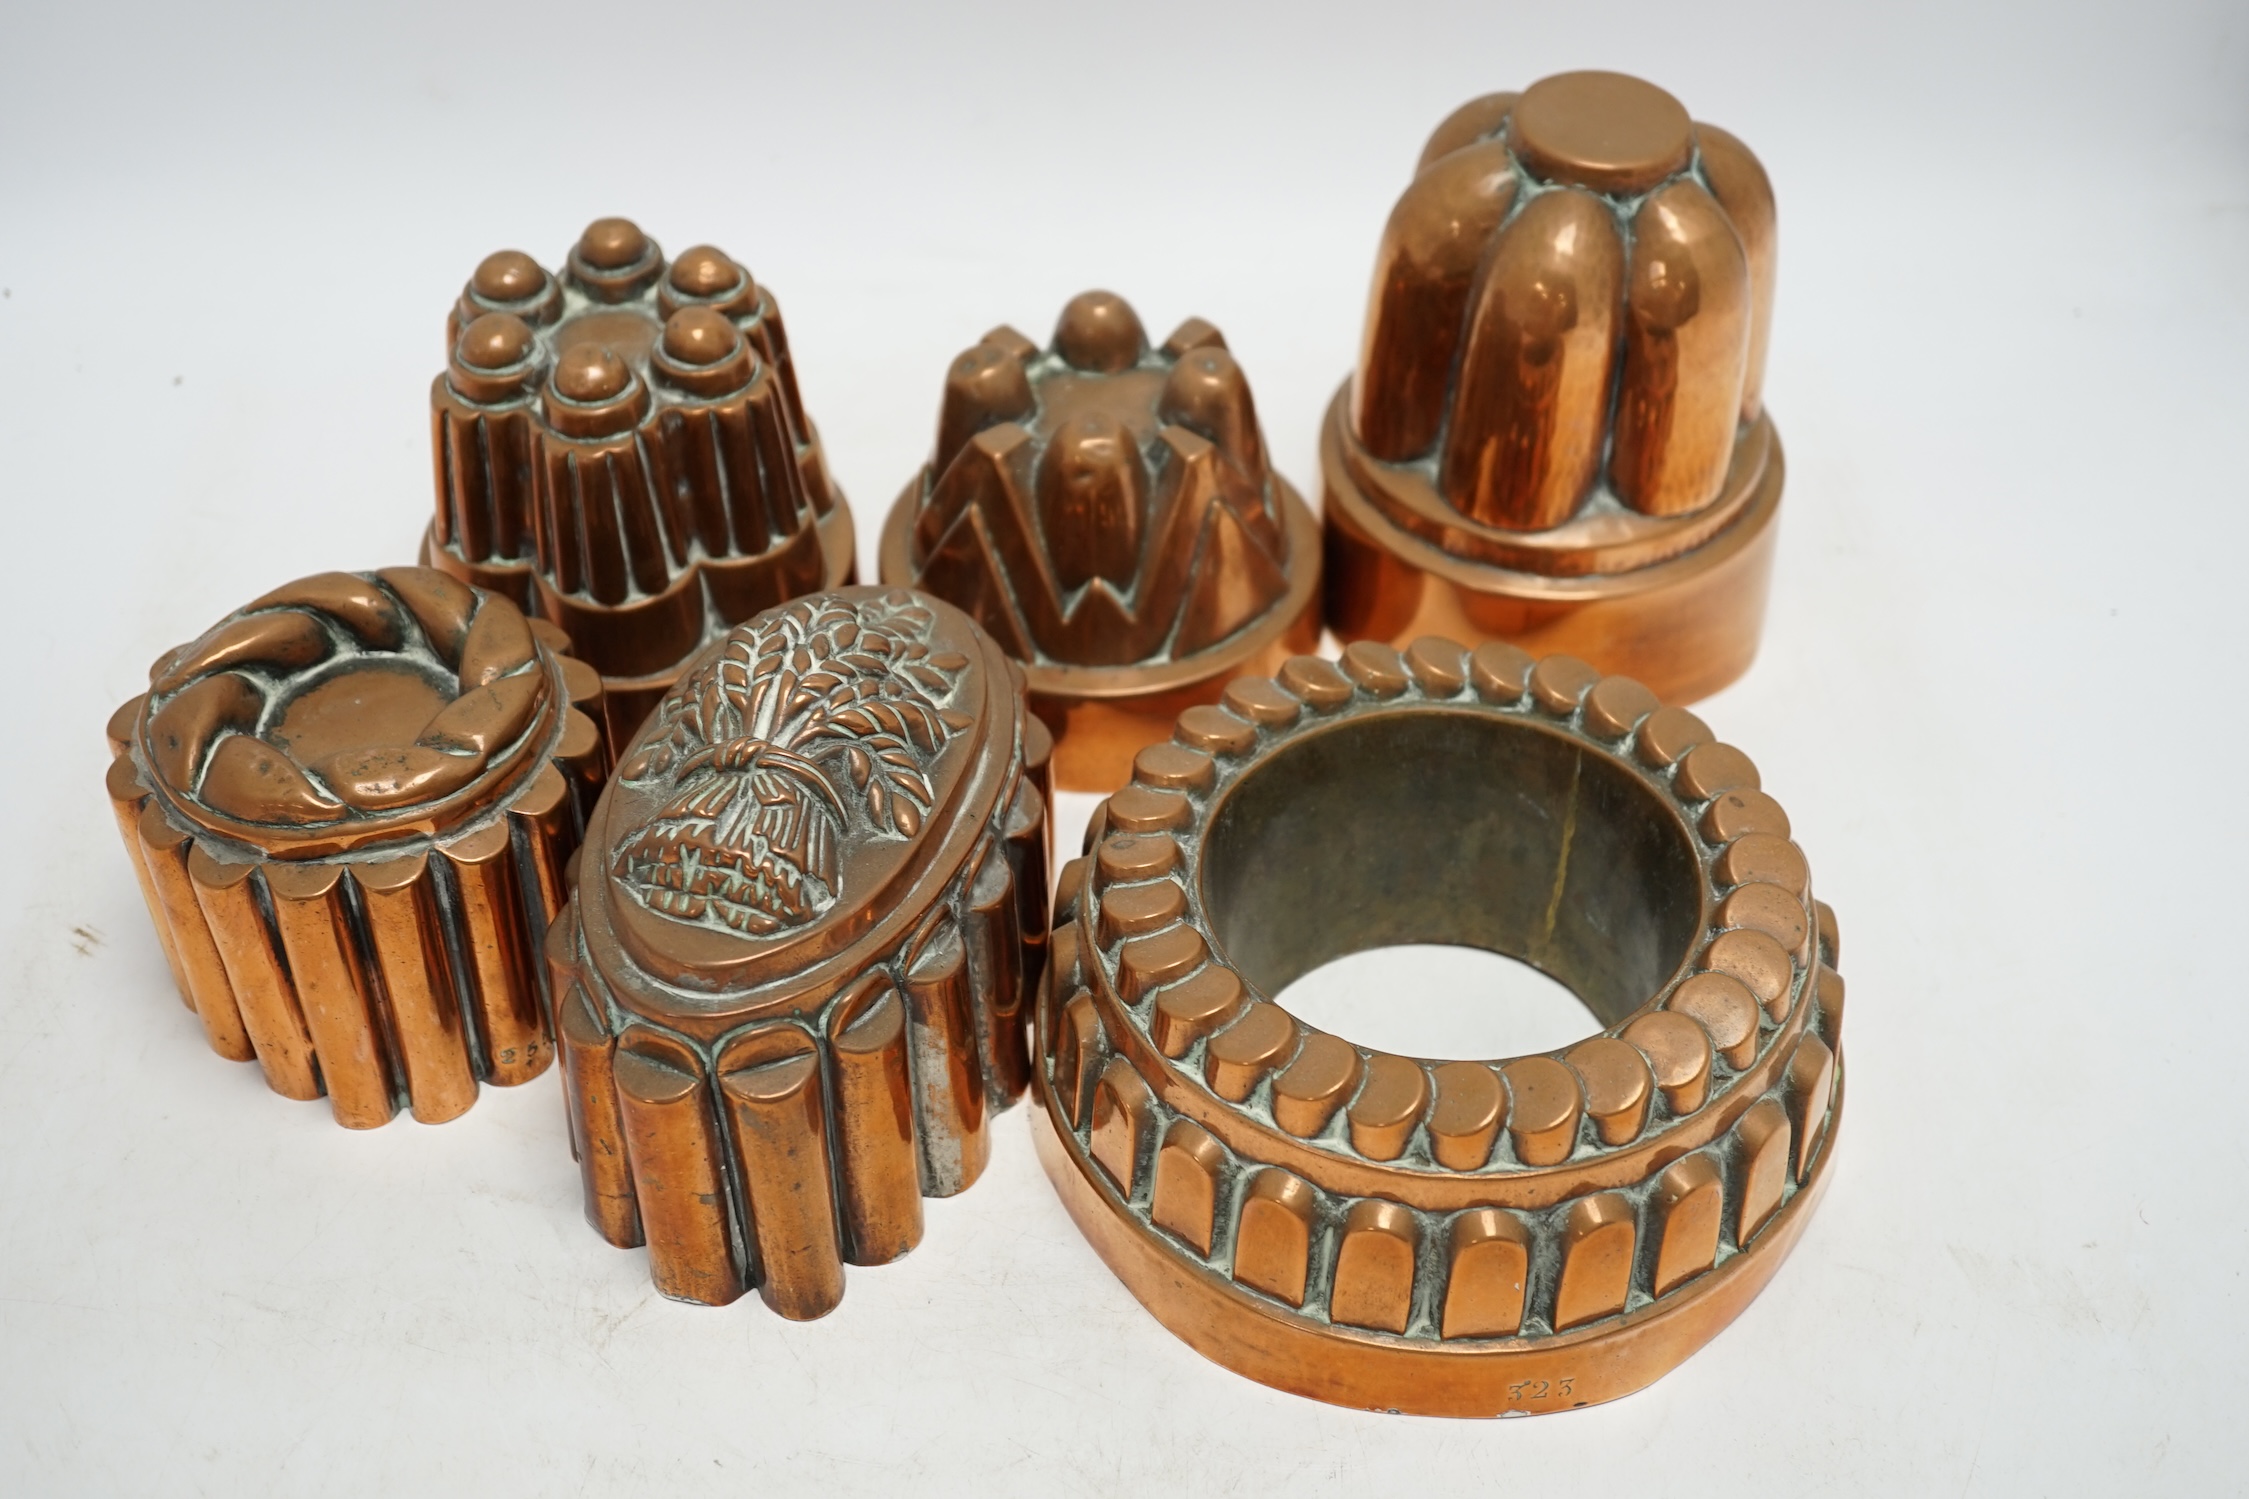 Six Victorian copper jelly moulds, tallest 14.5cm high. Condition - good